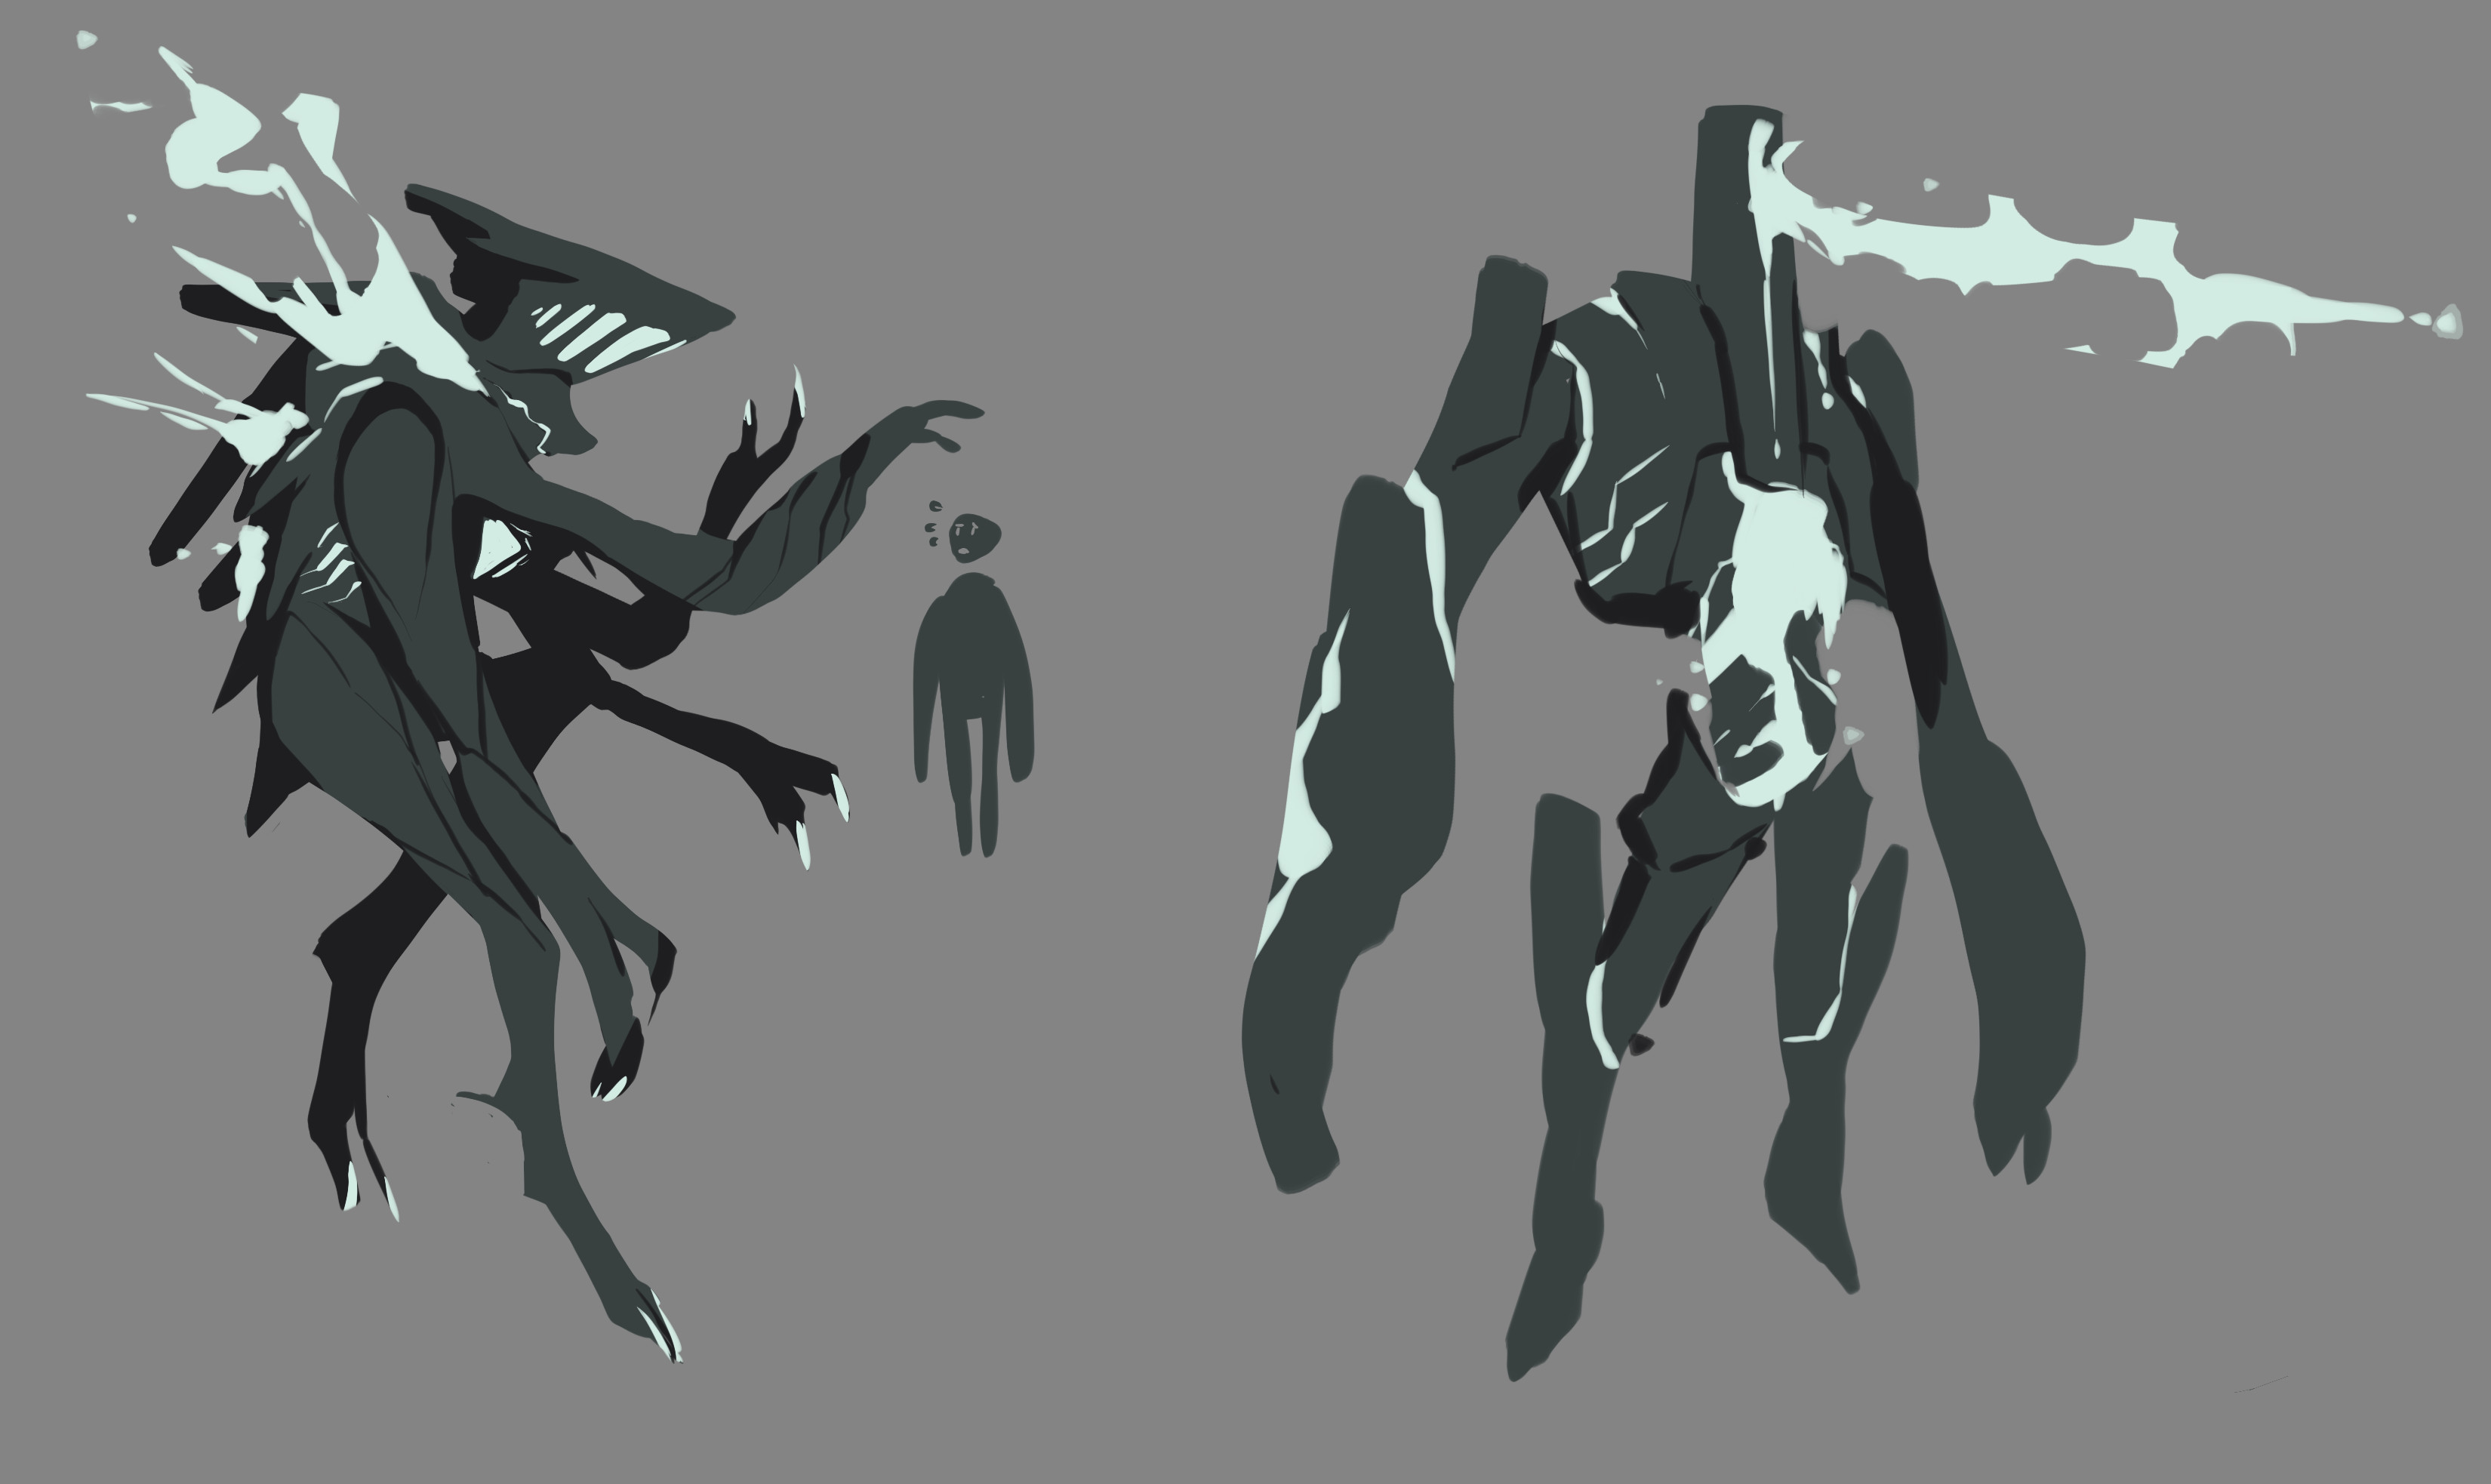 more giant creatures